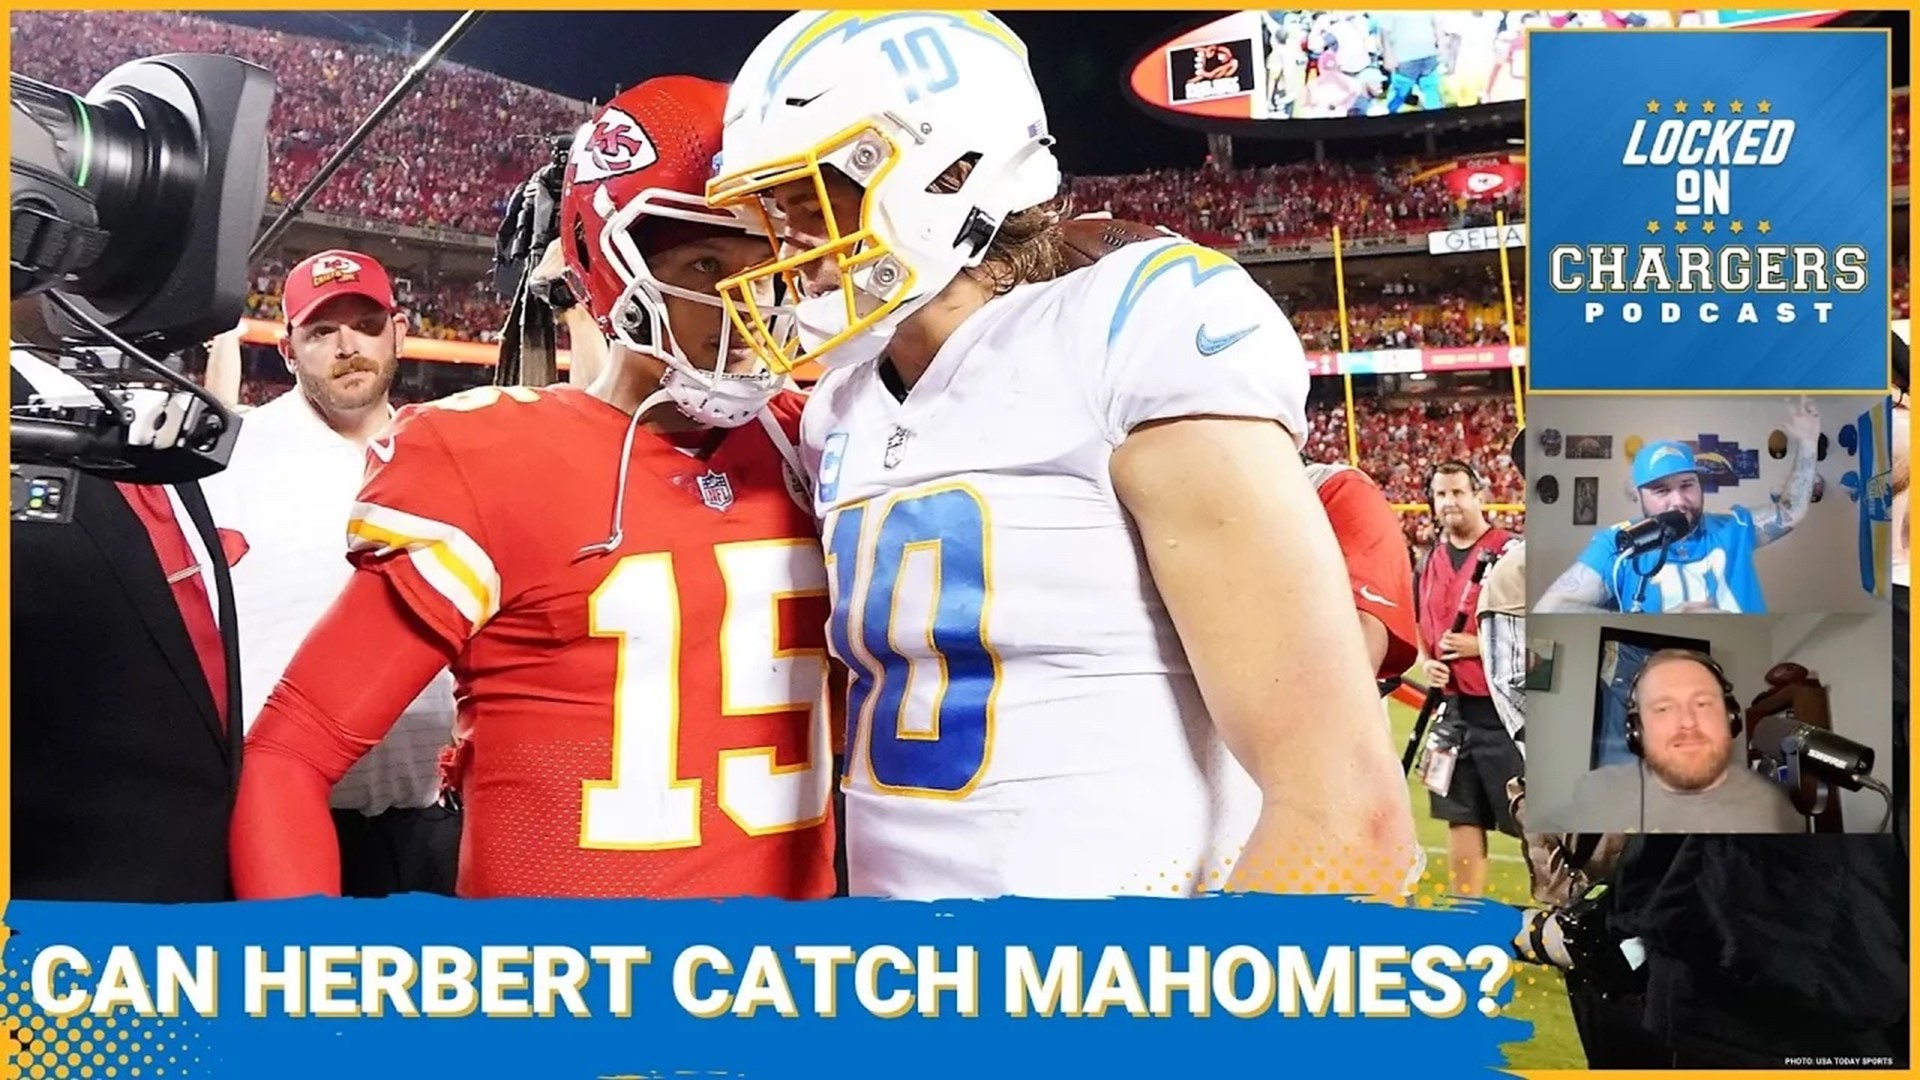 The Los Angeles Chargers have been chasing Patrick Mahomes and the Chiefs for Justin Herbert's whole career, but Herbert has the talent to get to that level.